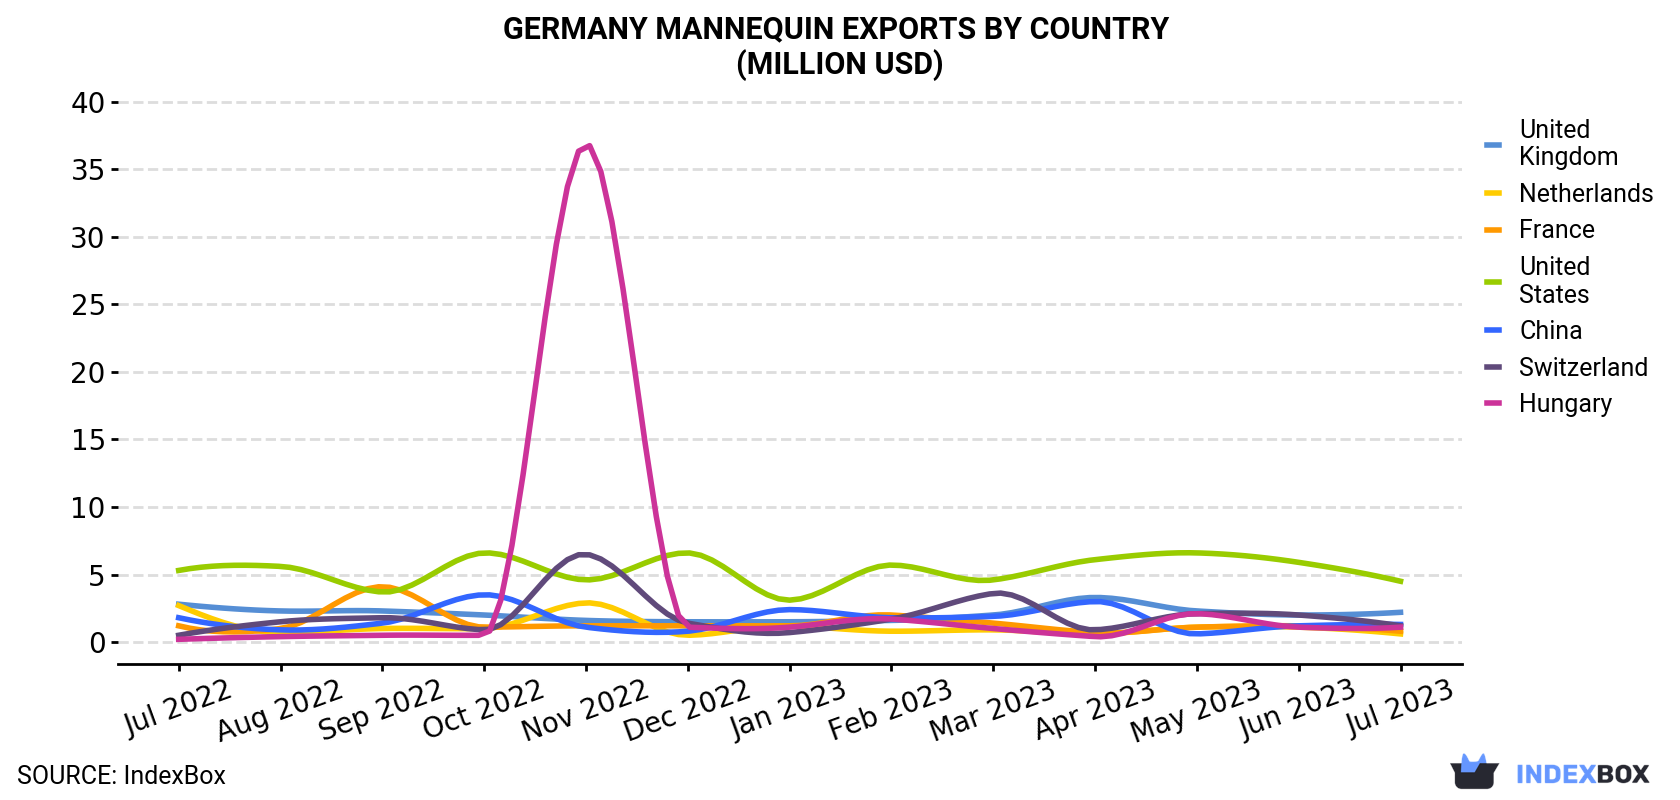 Germany Mannequin Exports By Country (Million USD)